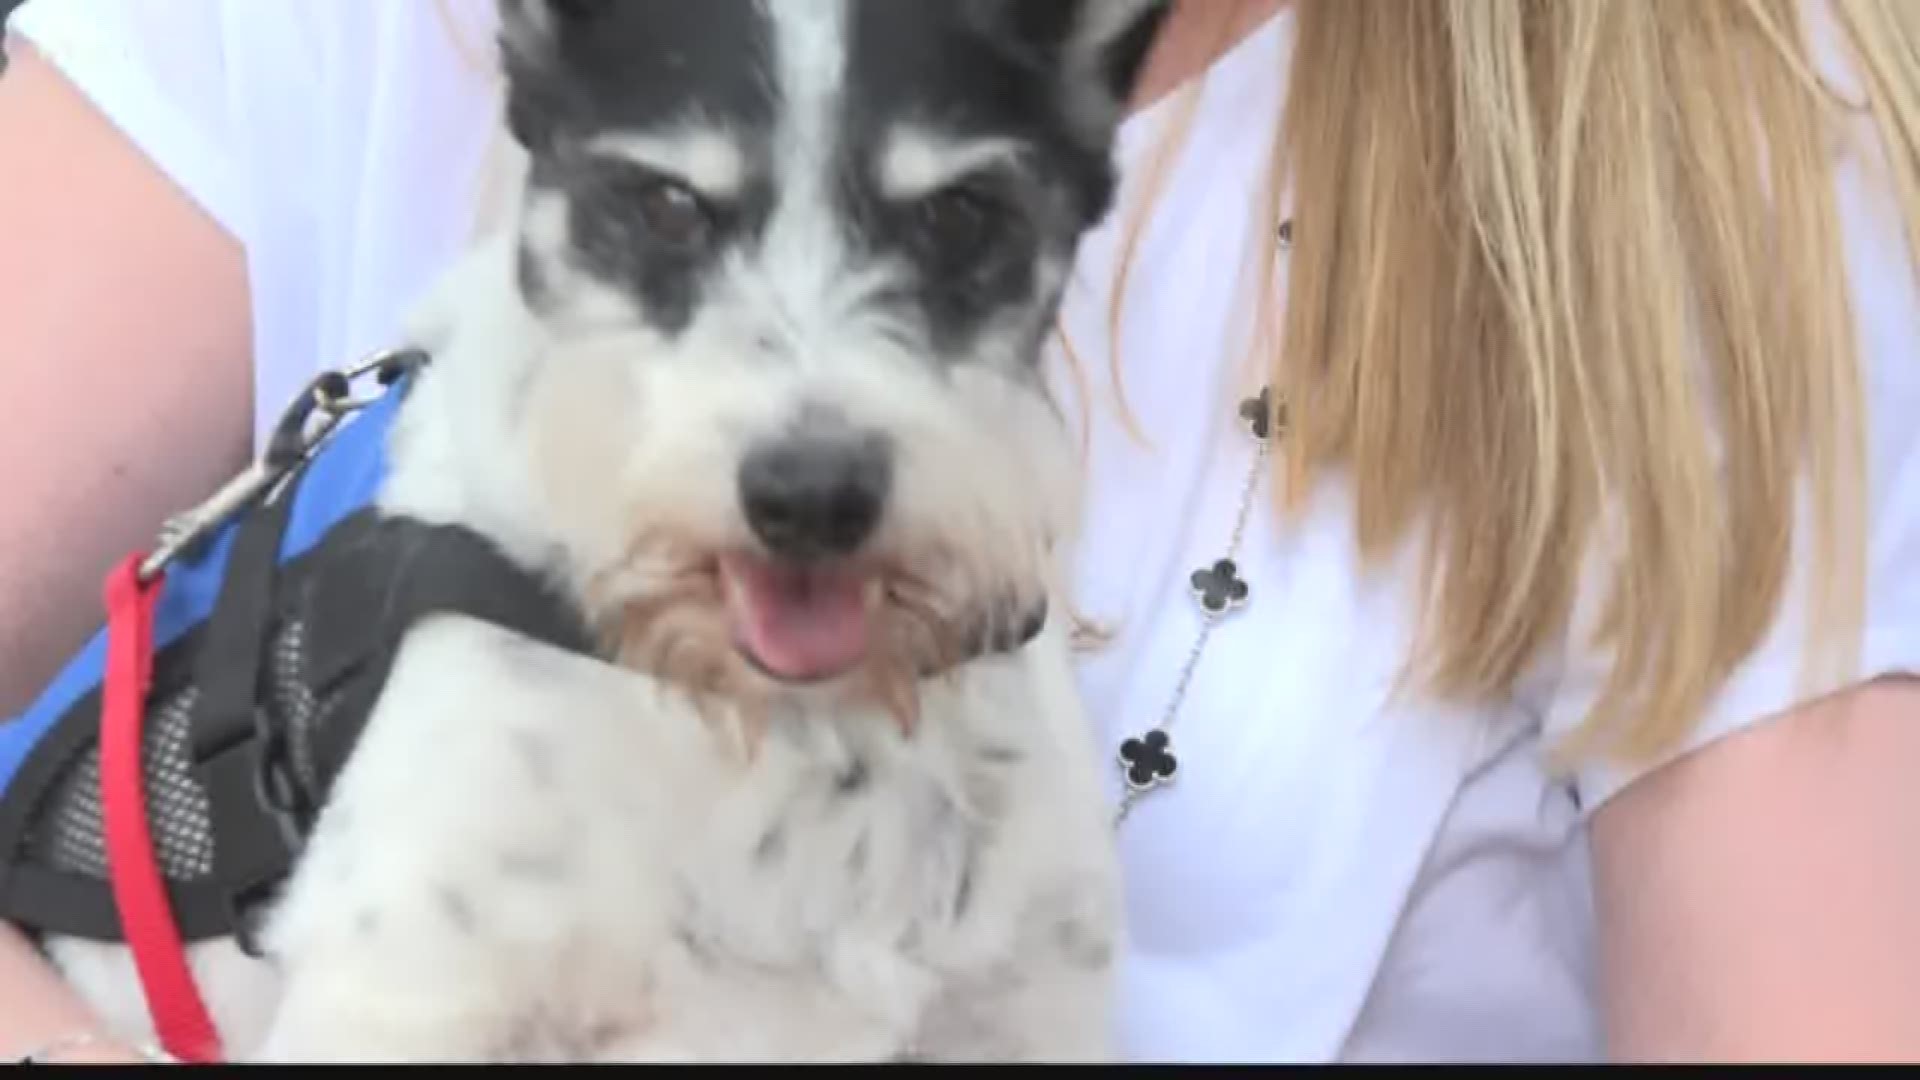 Julieanne Schmidt says her dog Dutch isn’t just a pet -- he’s part of the family.

“He’s like my second heart,” Schmidt said. She rescued Dutch from an animal shelter after Hurricane Katrina hit in 2006. She said Dutch is like no other dog she’s ever owned.

So when the now 13-year-old miniature schnauzer was diagnosed with congestive heart failure early last year, Schmidt decided she would do whatever it took to help her dog get better.

“We just knew we couldn’t see him suffer and die,” she said. “He would just basically stop breathing and his heart would stop and I couldn’t bear that.”